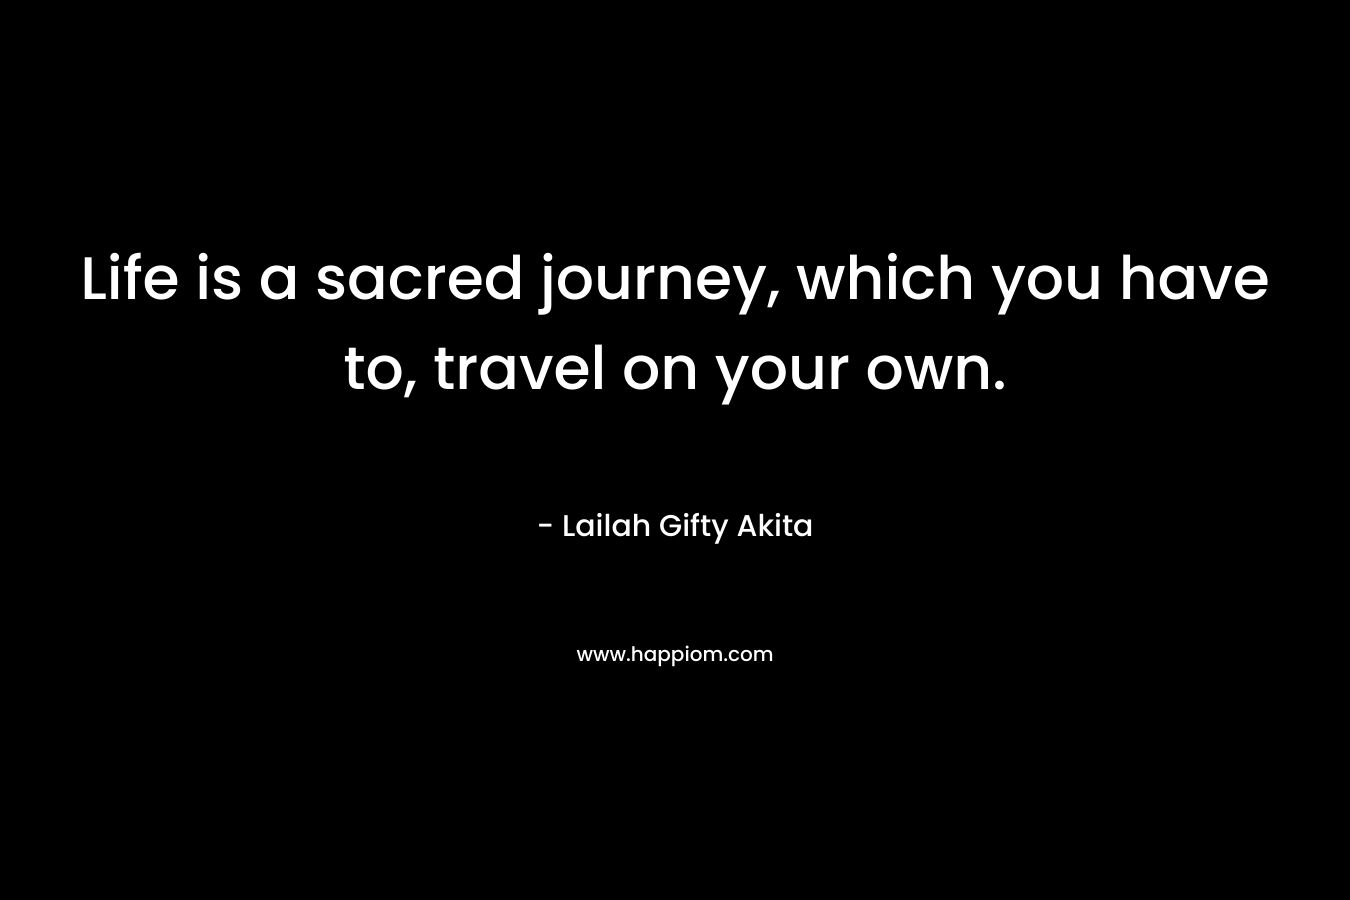 Life is a sacred journey, which you have to, travel on your own.